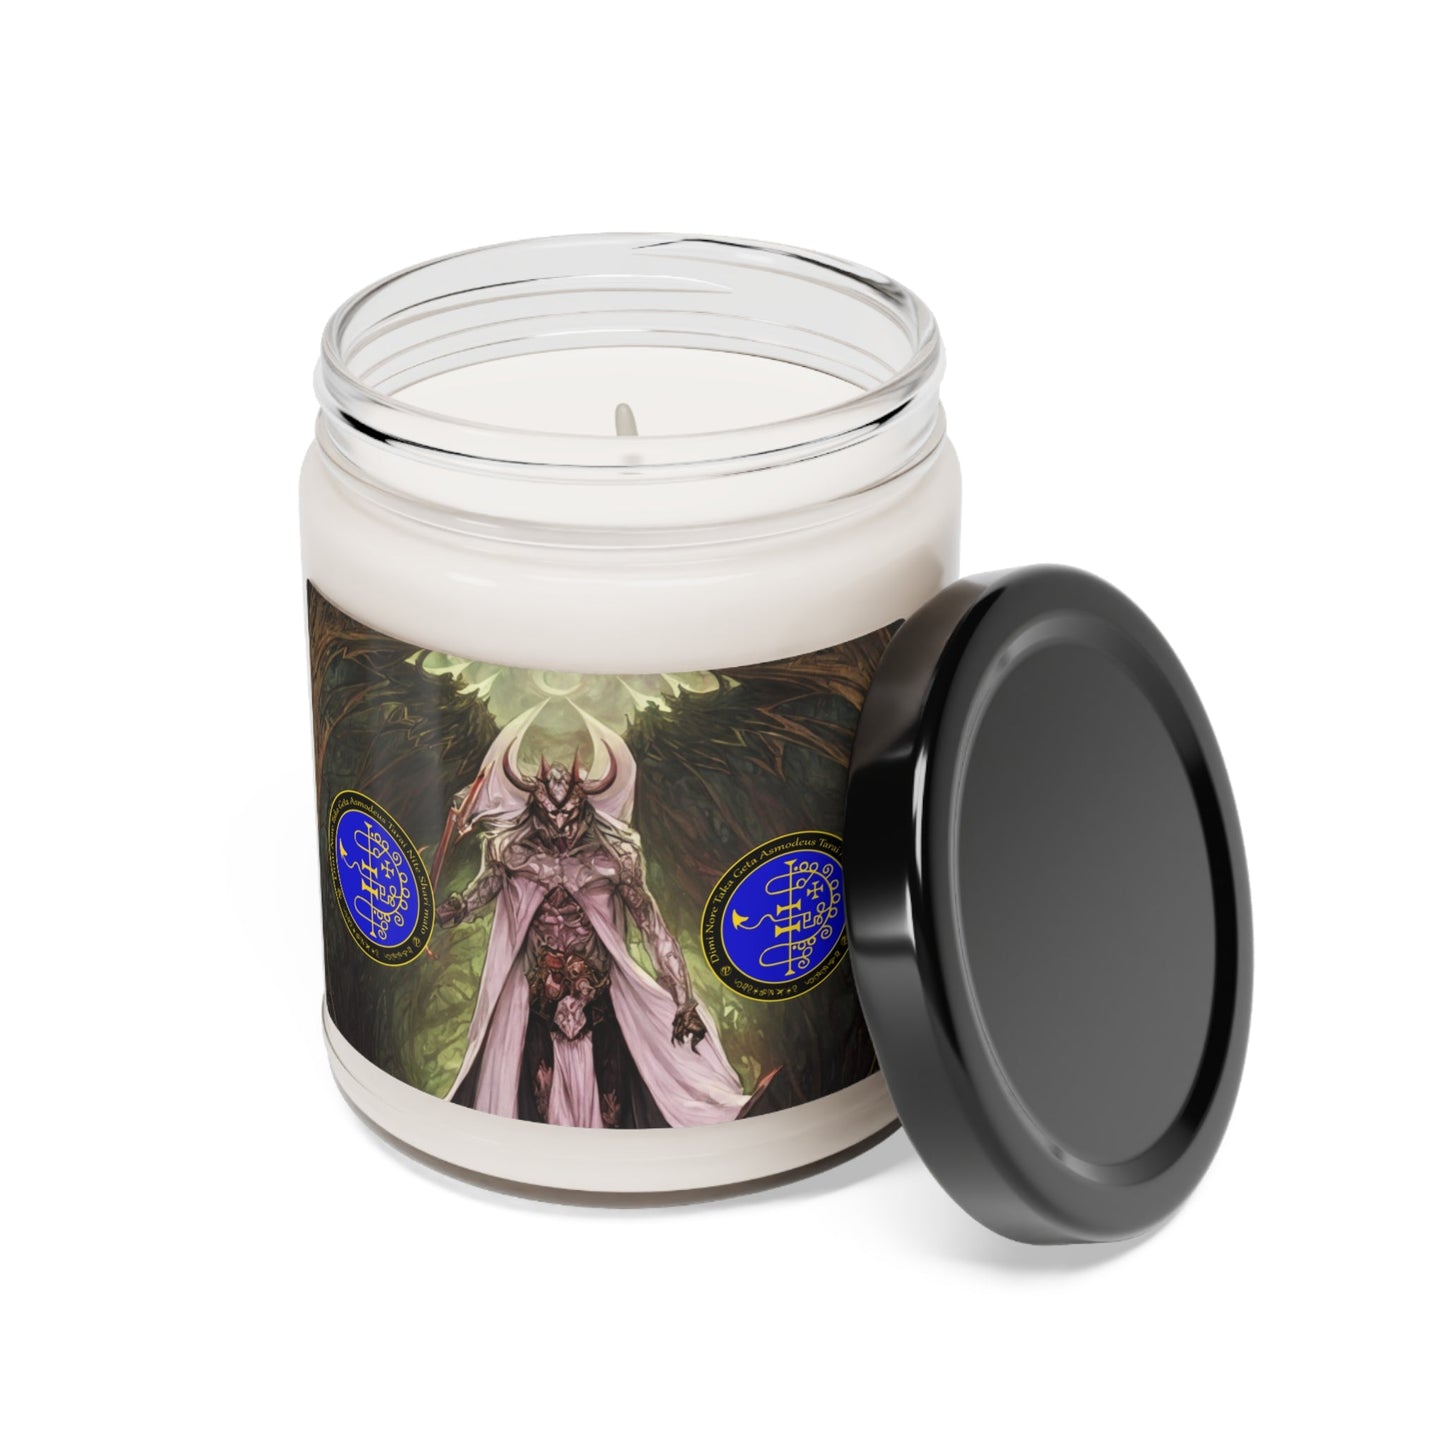 Demon-Asmodeus-oltar-Soy-Scented-Soy Candle-for-Gamble-related-offerings-rituals-inicijations-or-praying-and-meditation-17